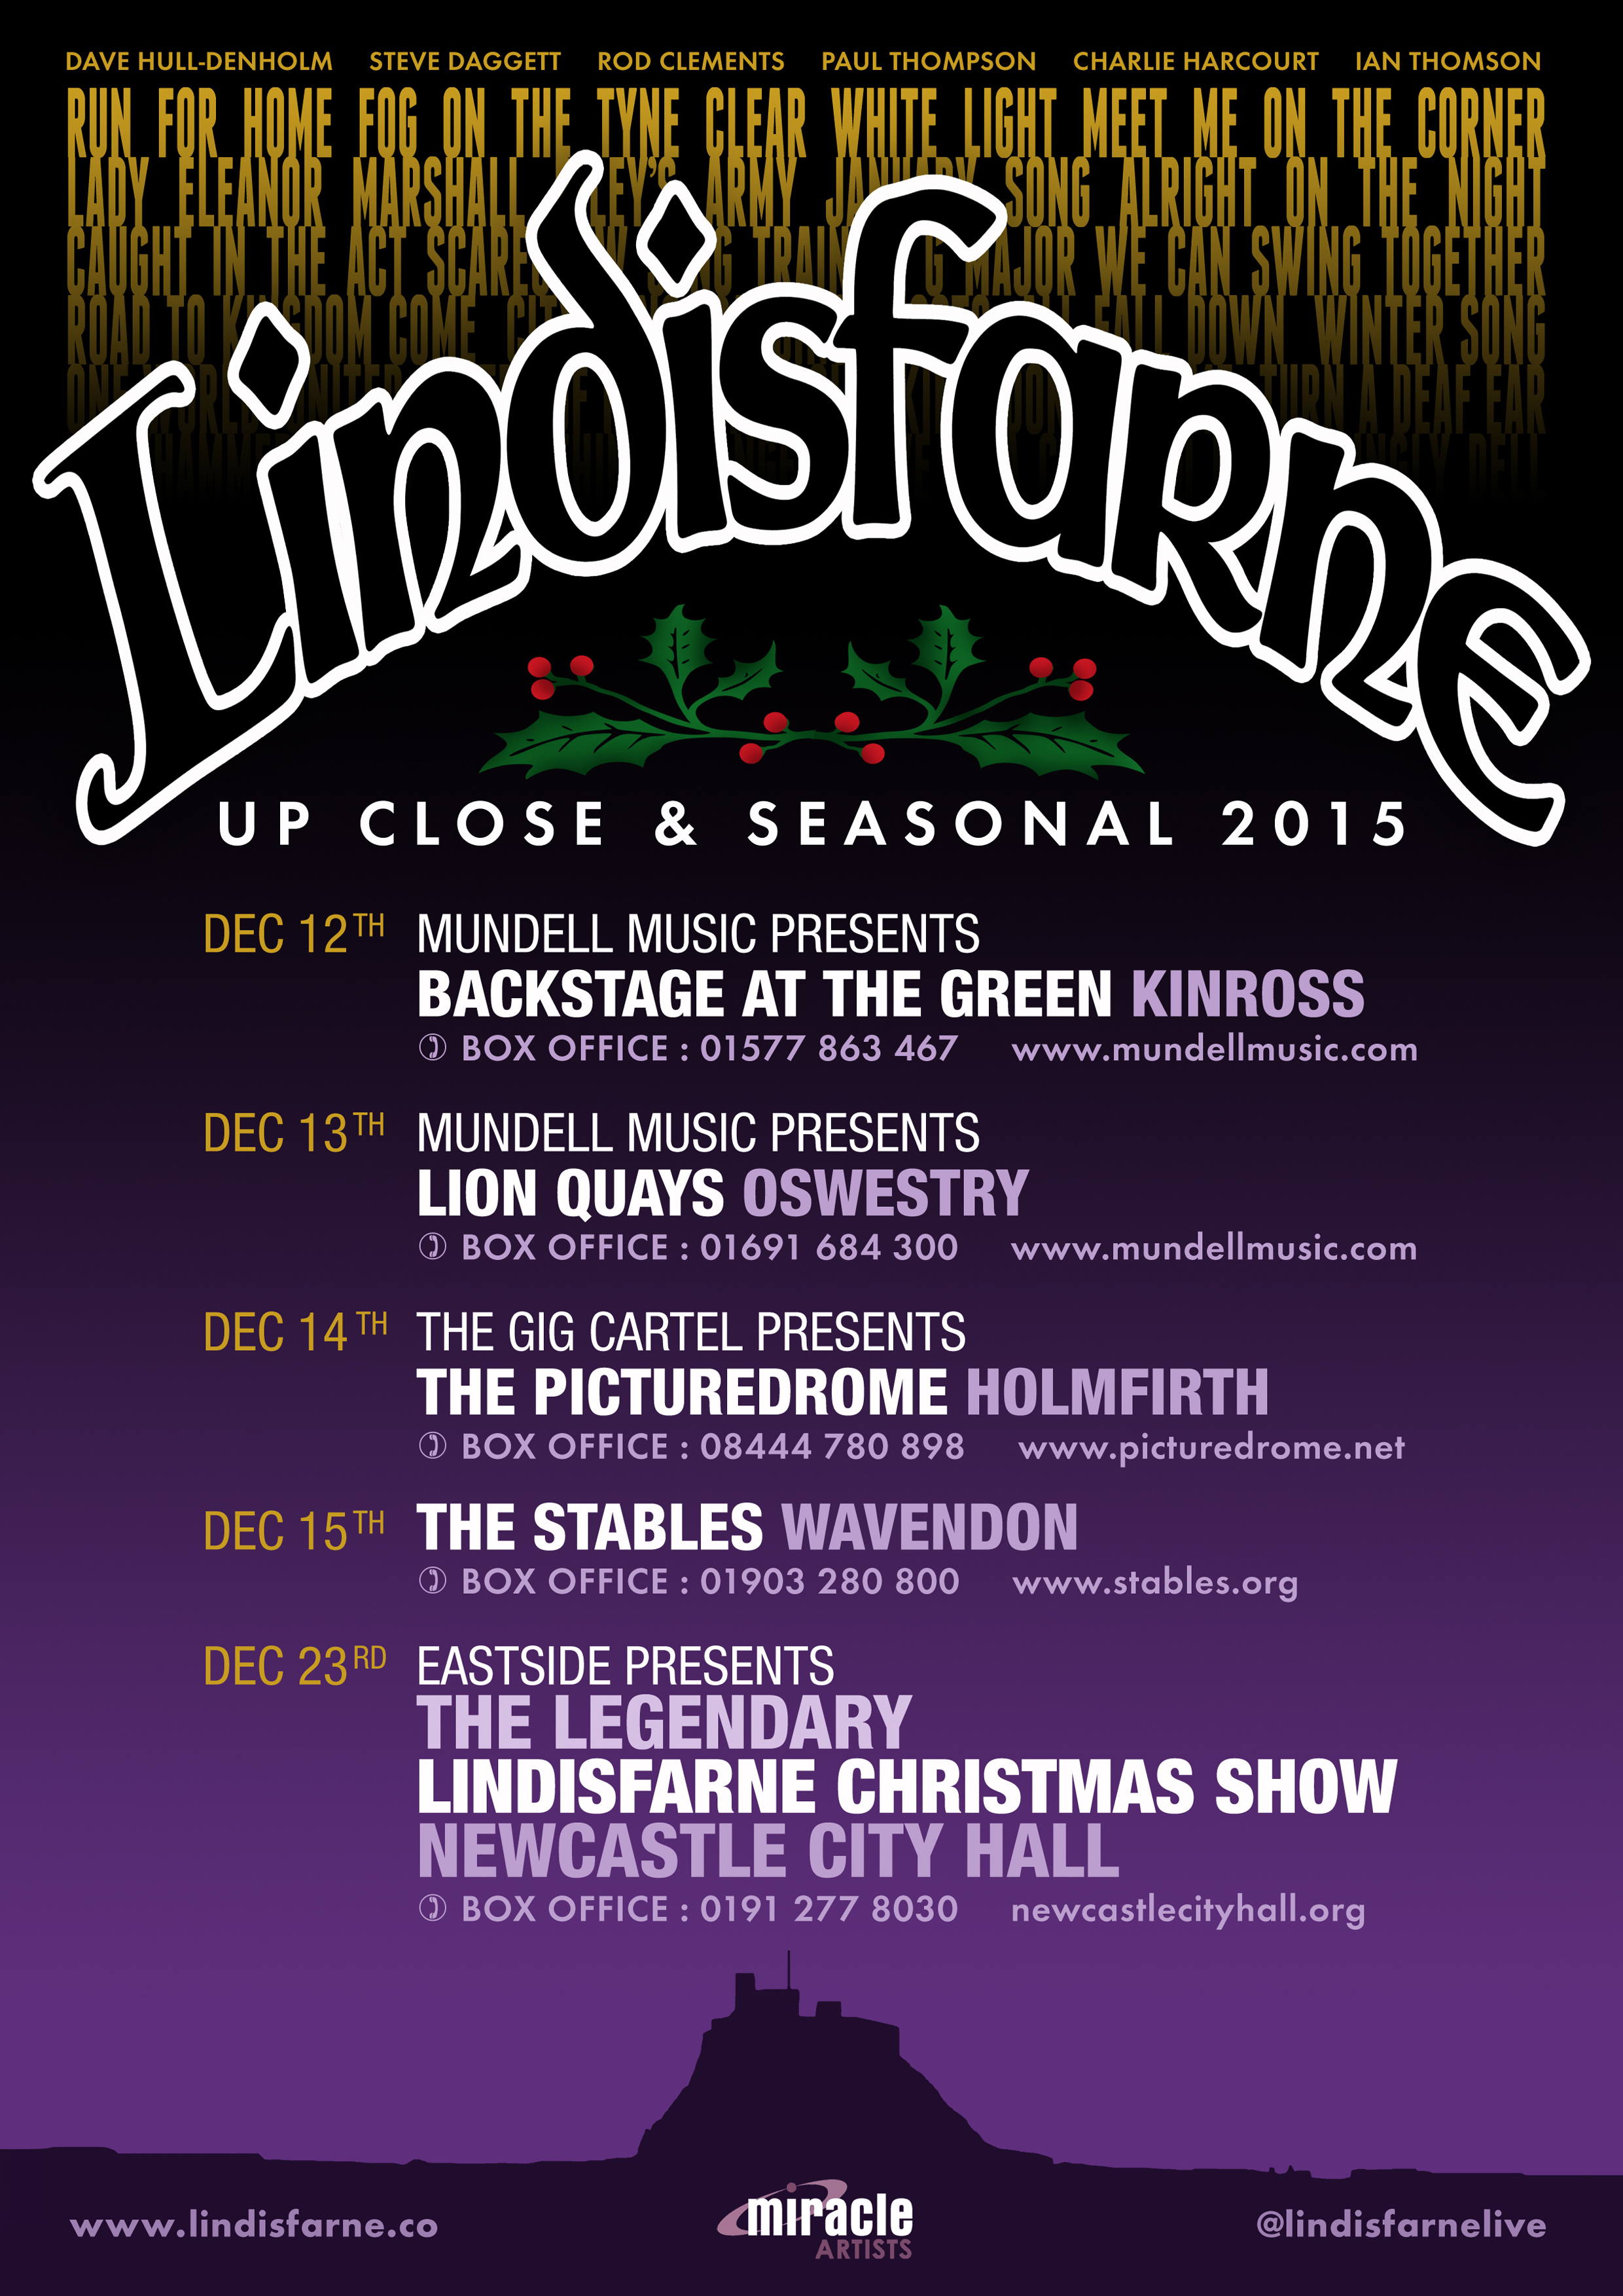 Lindisfarne/Nearly Sold Out!